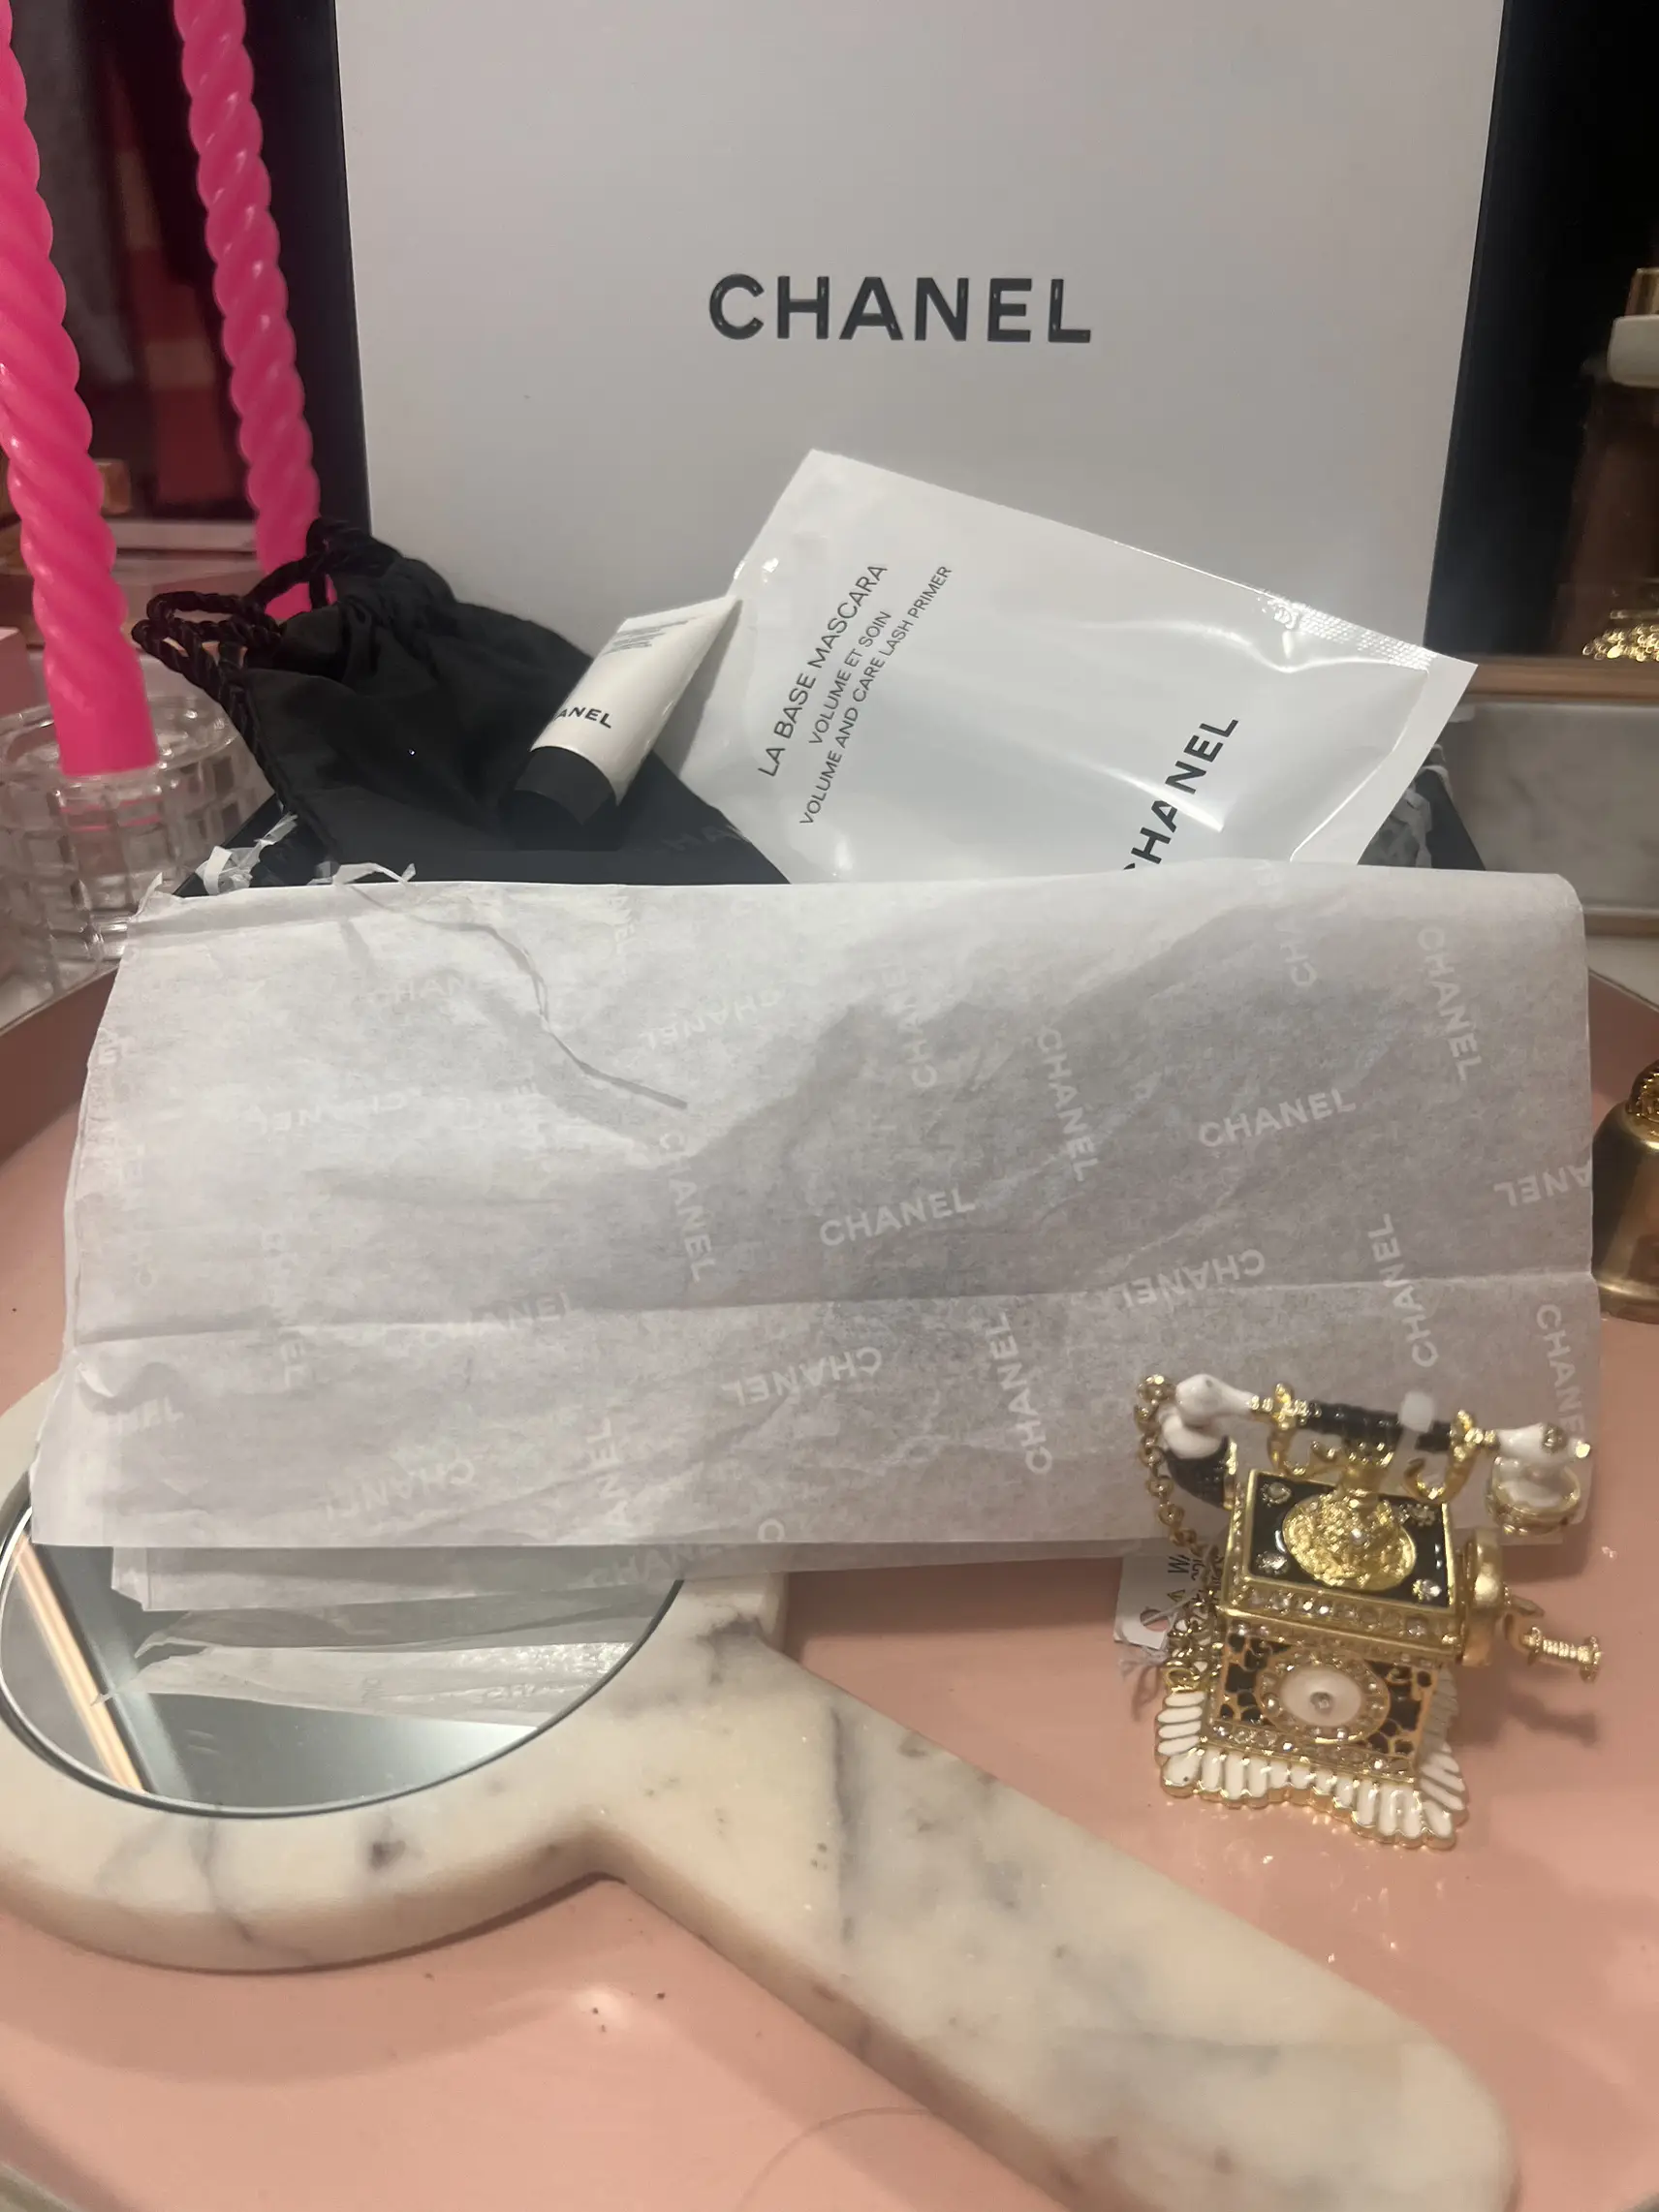 Chanel Free Samples, Gallery posted by Bossladydiary